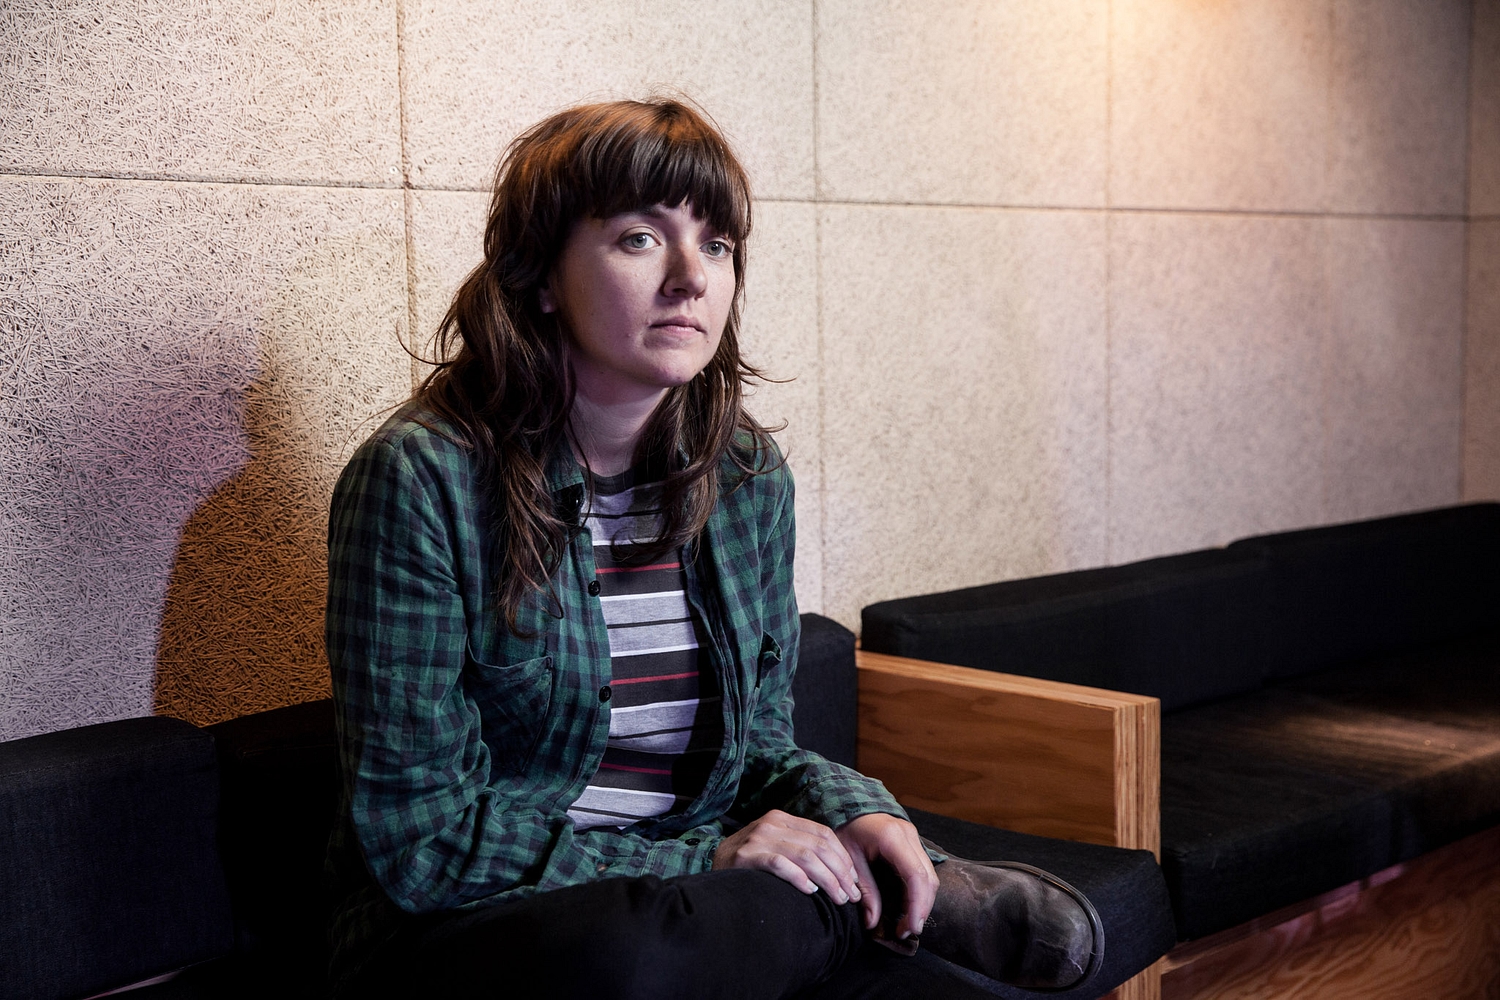 Courtney Barnett, White Lung, Cloud Nothings sign up for Cassette Store Day 2014